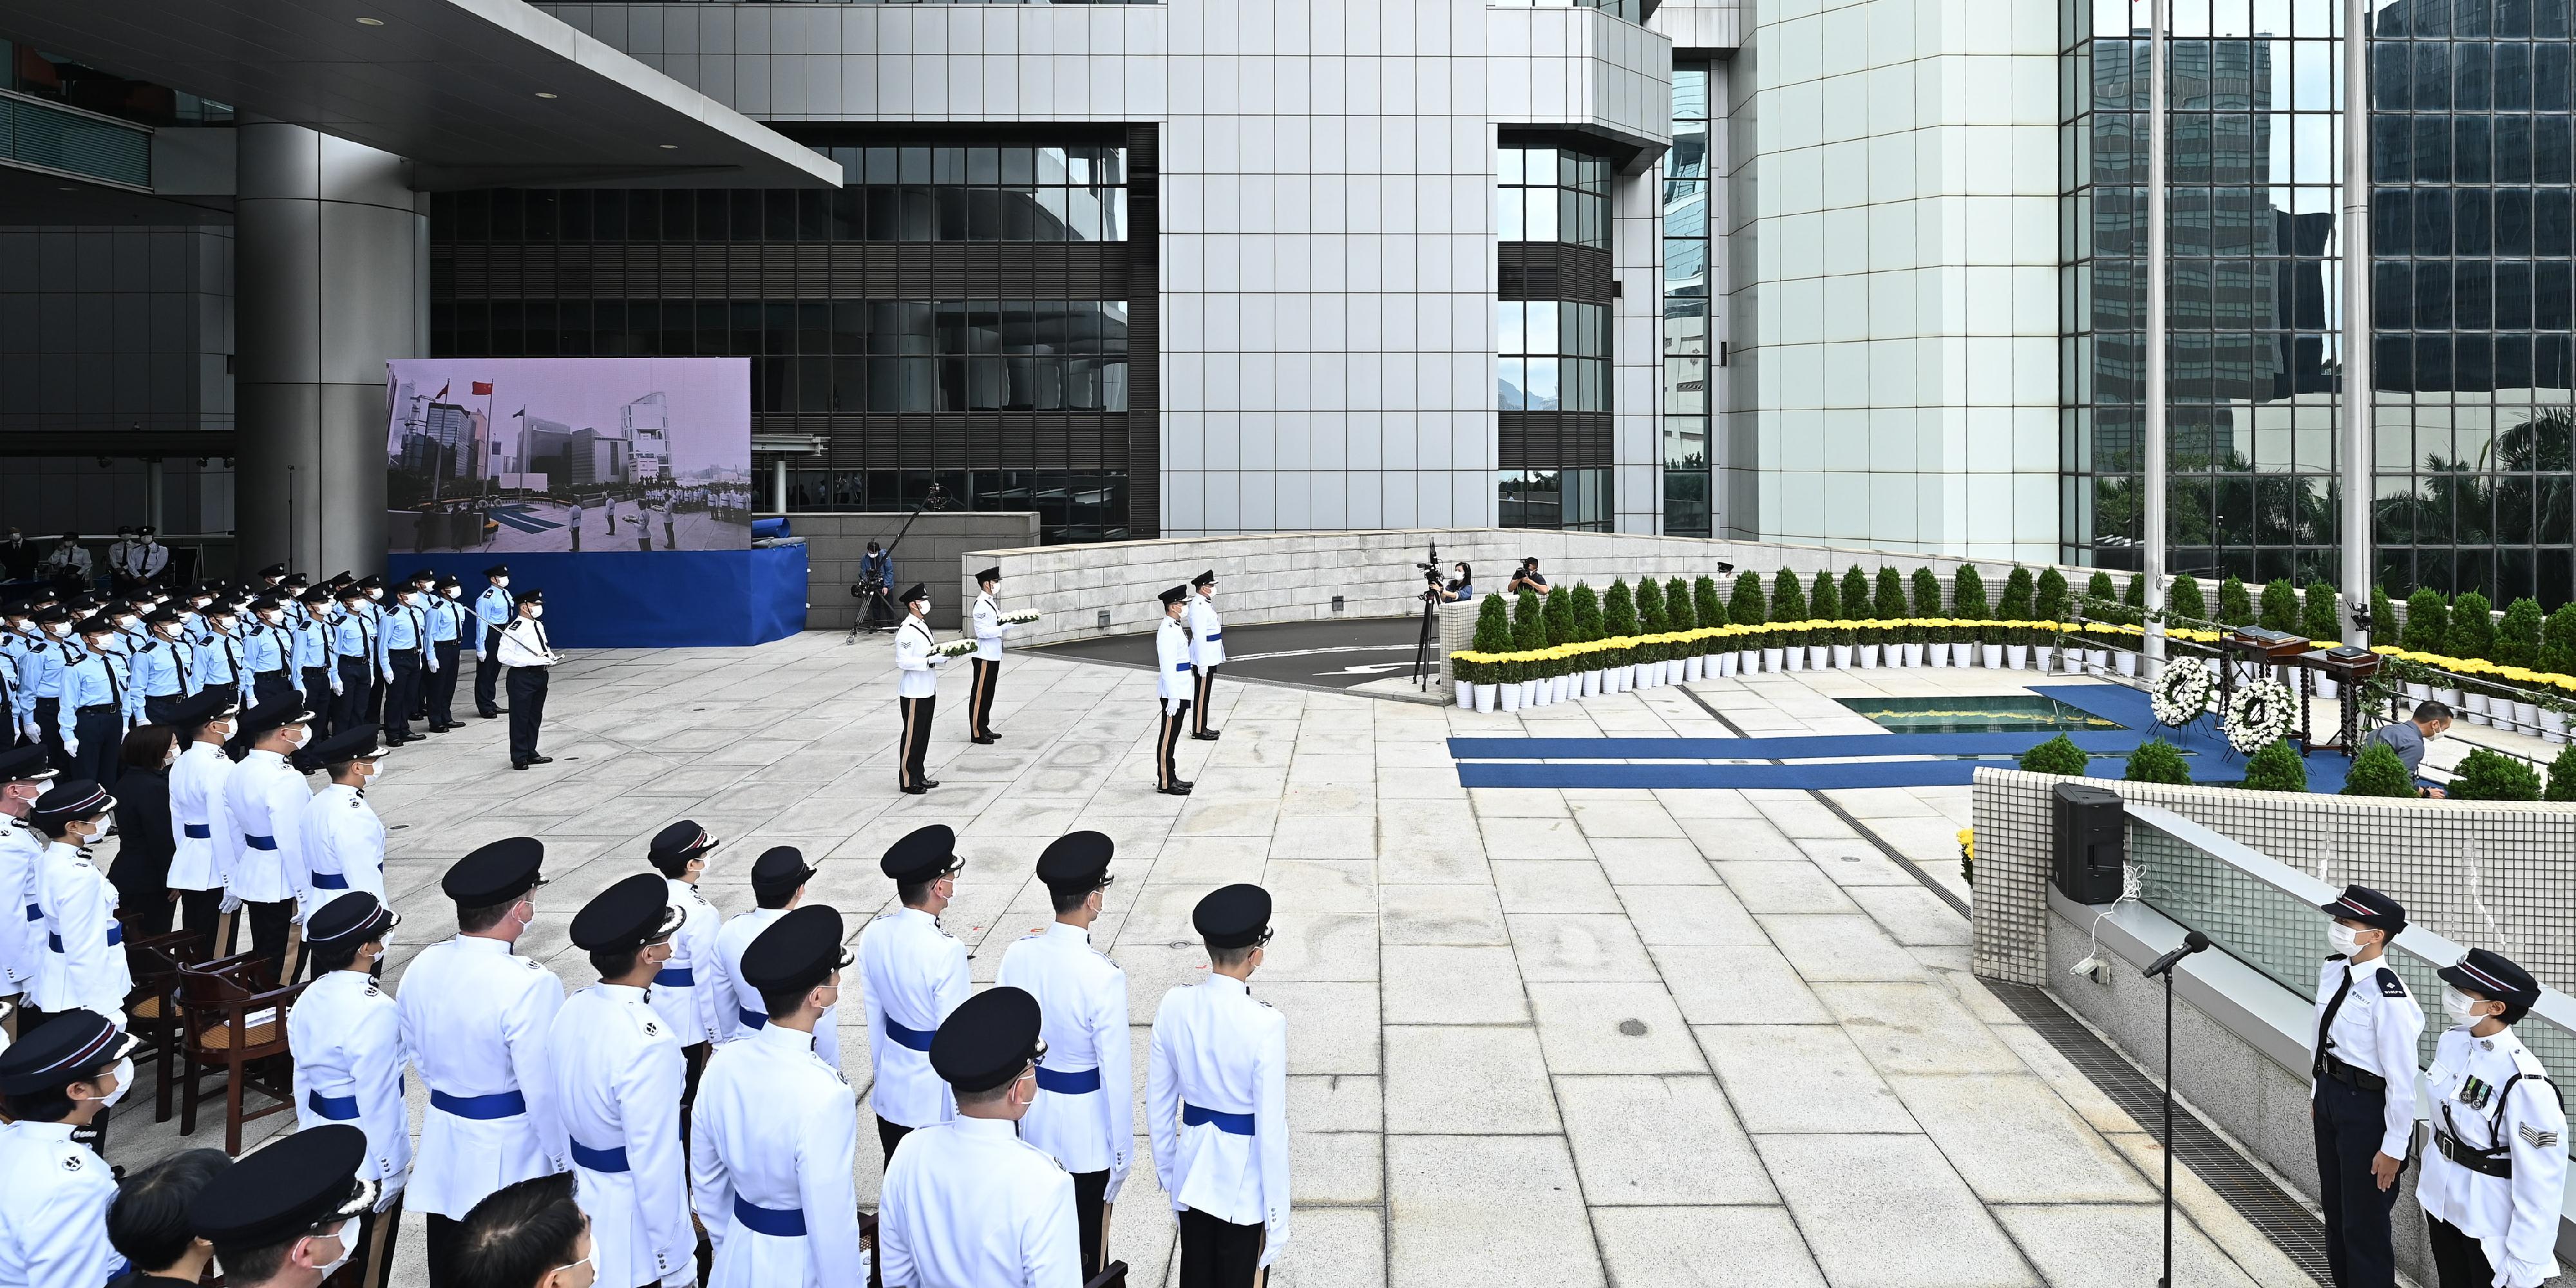 The Hong Kong Police Force holds a ceremony at the Police Headquarters this morning (November 11) to pay tribute to members of the Hong Kong Police Force and Hong Kong Auxiliary Police Force who have given their lives in the line of duty.